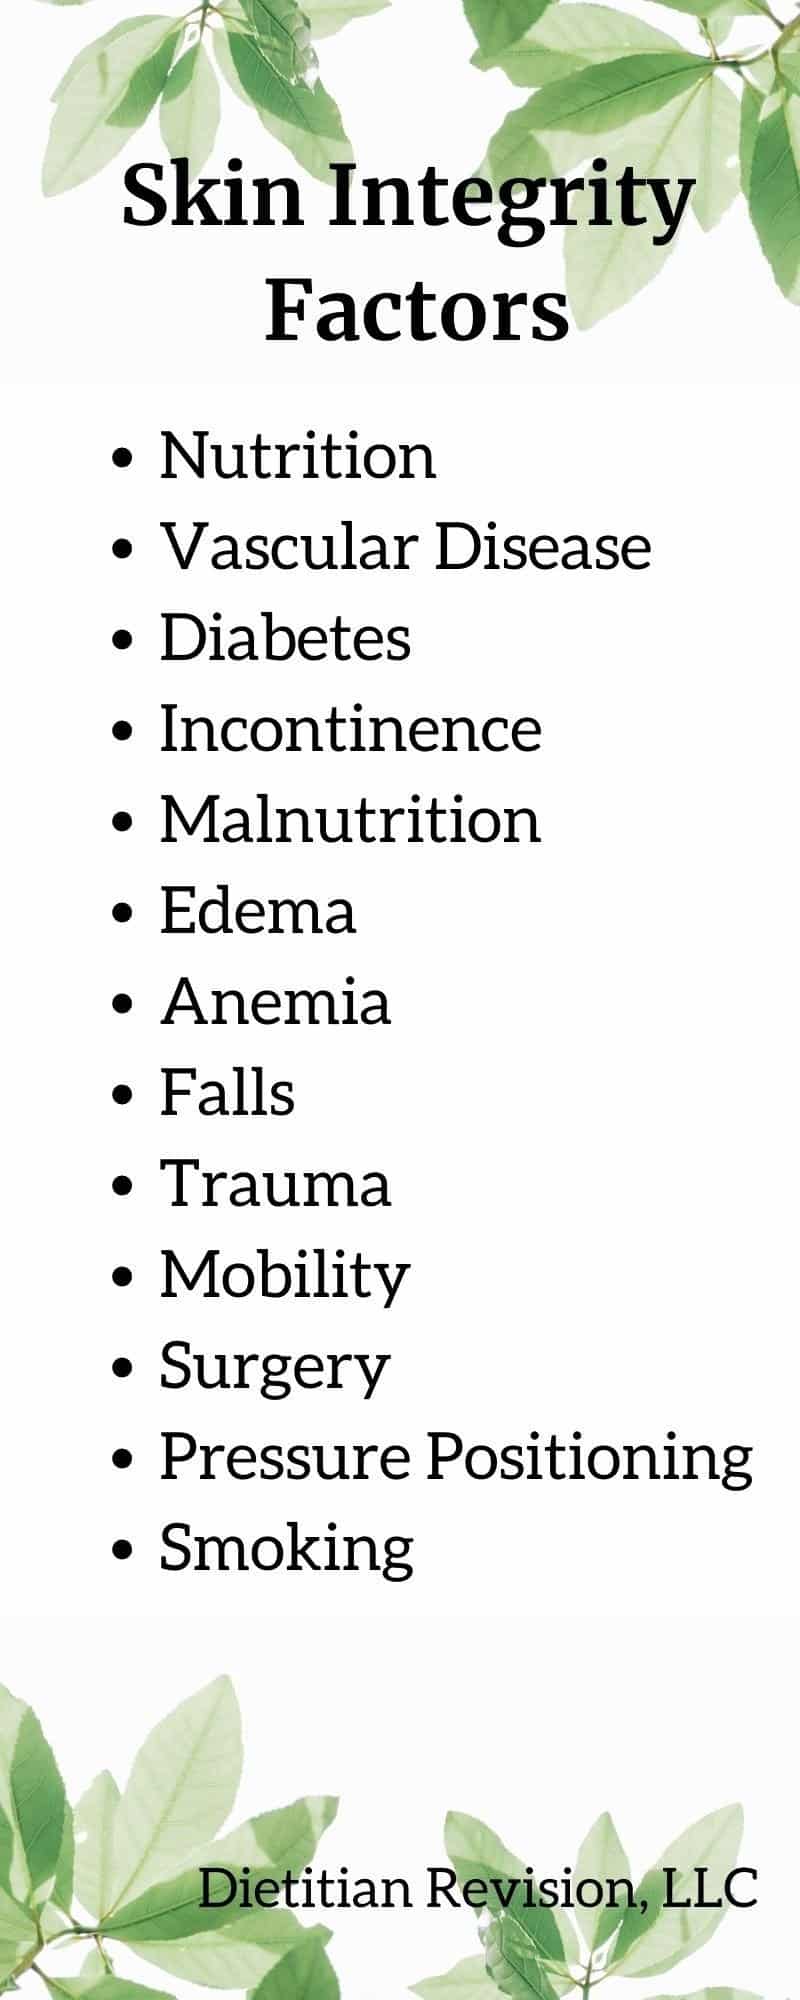 List of skin integrity factors: nutrition, vascular disease, diabetes, incontinence, malnutrition, edema, anemia, falls, trauma, mobility, surgery, pressure positioning, smoking. 